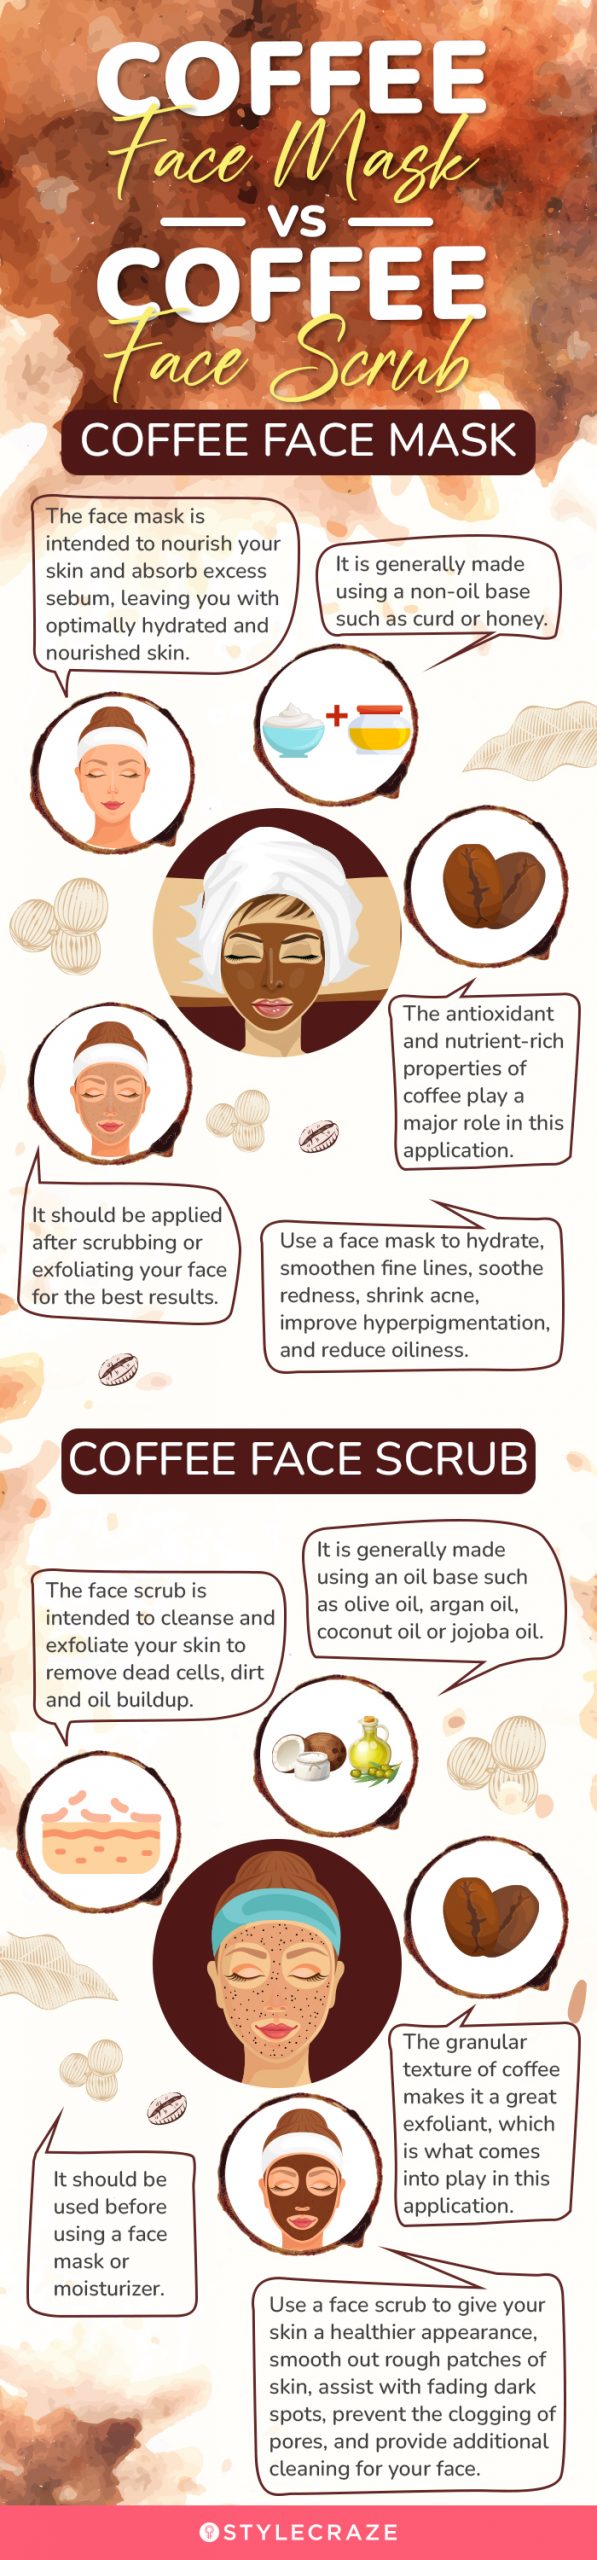 coffee face mask vs coffee face scrub (infographic)